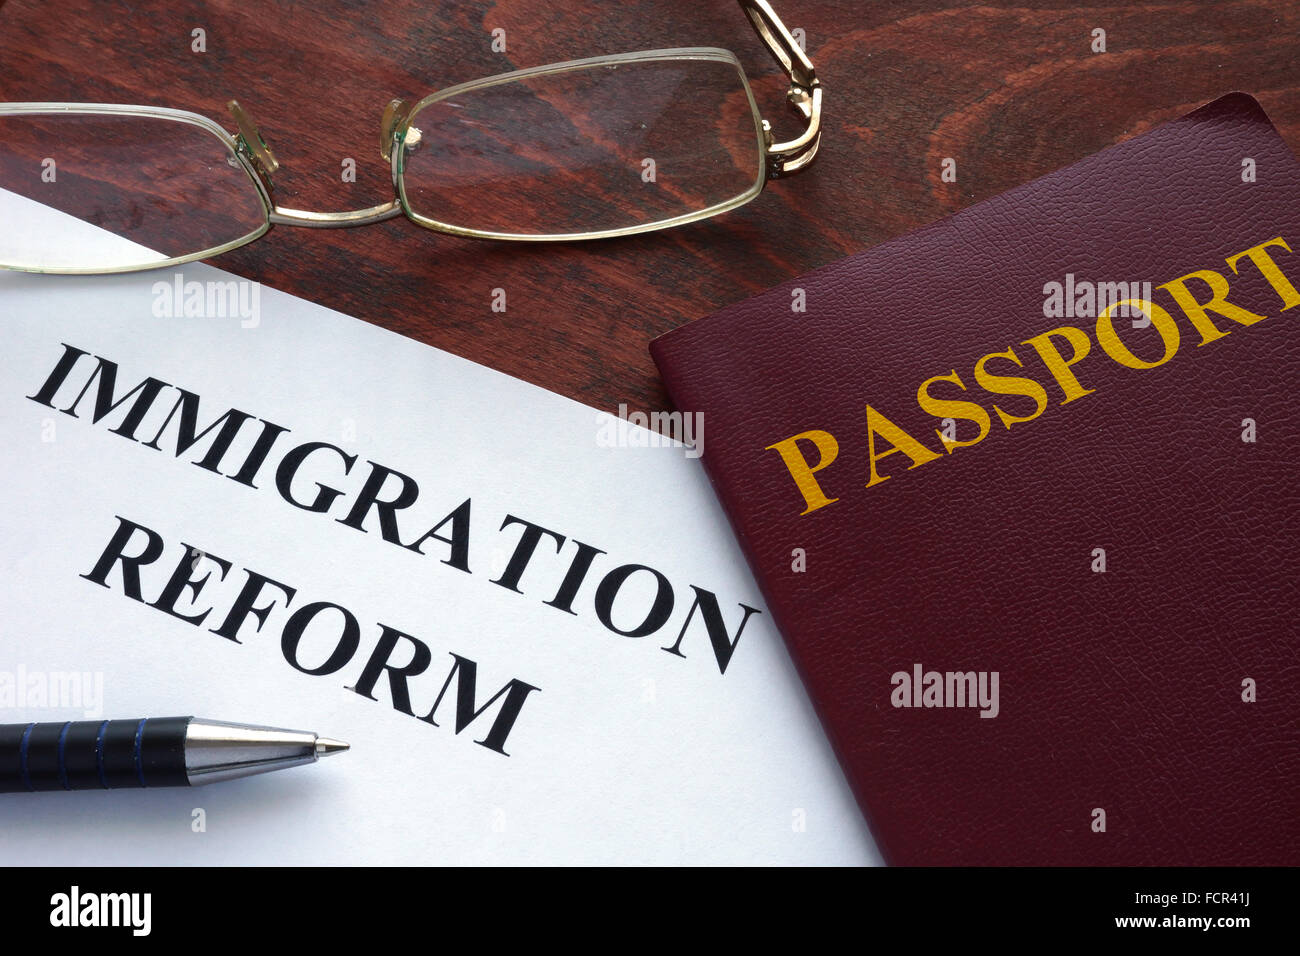 Paper with immigration reform on a table. Stock Photo